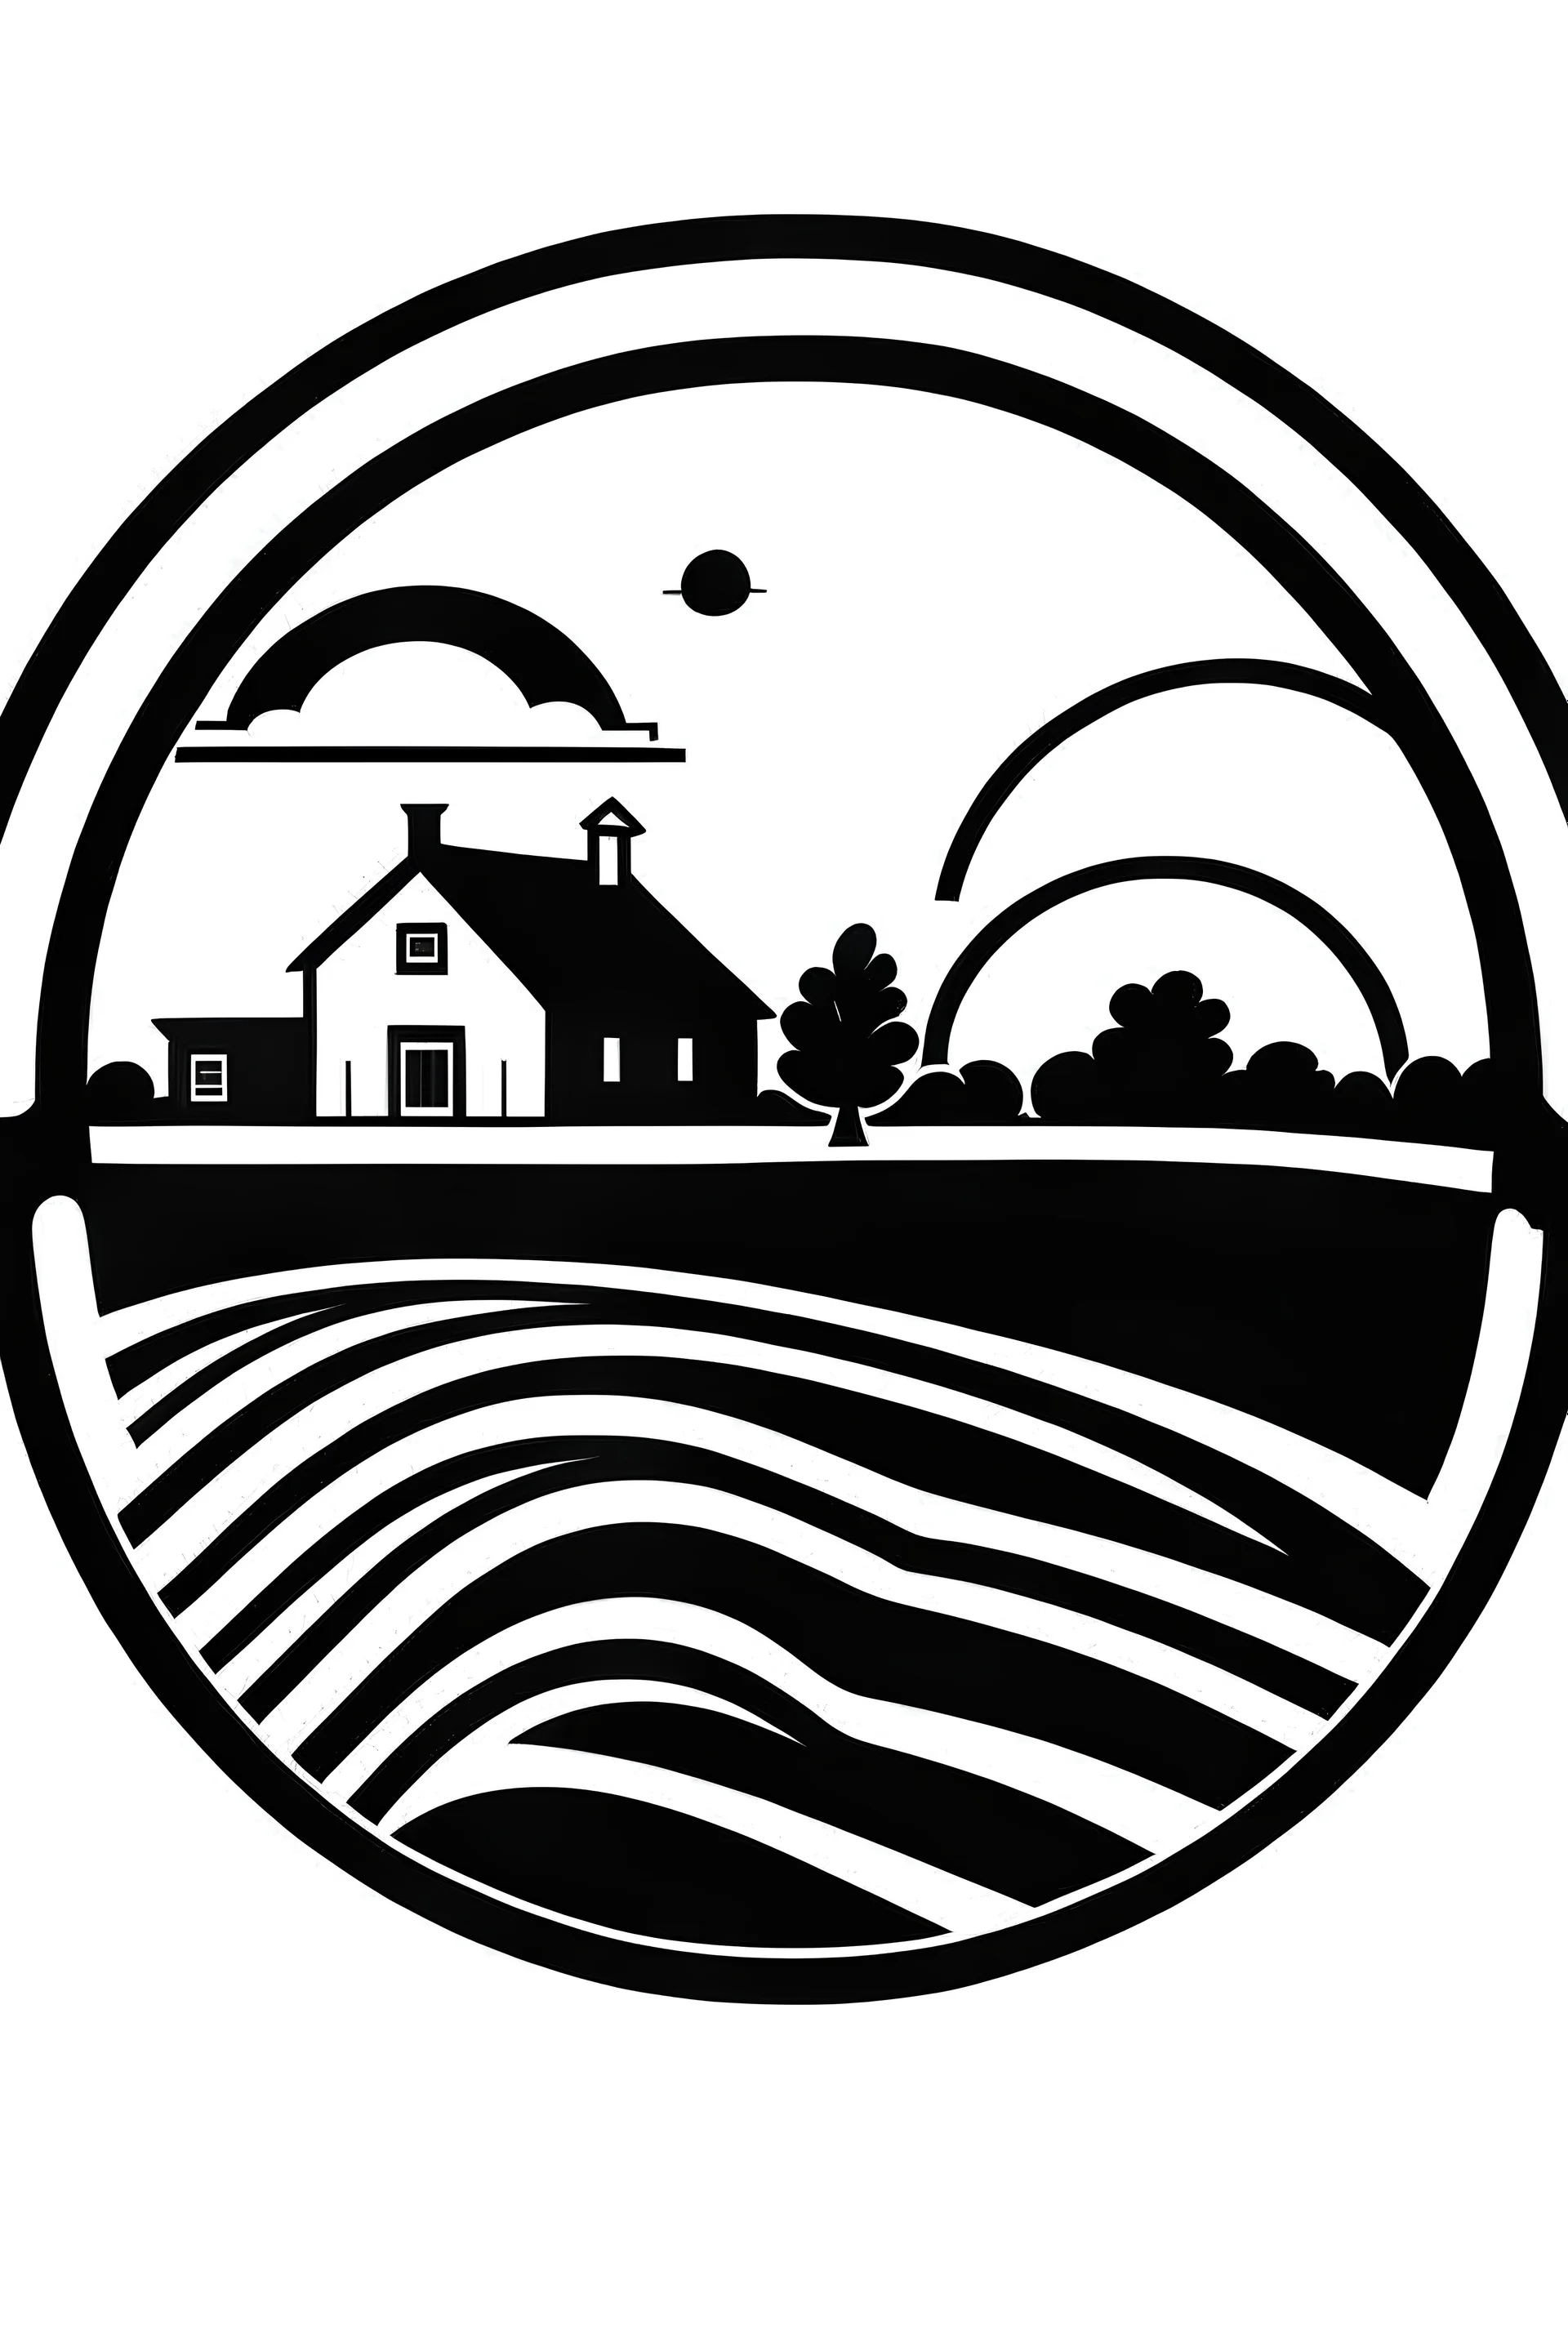 make a new rural development logo with circle form, with black and white